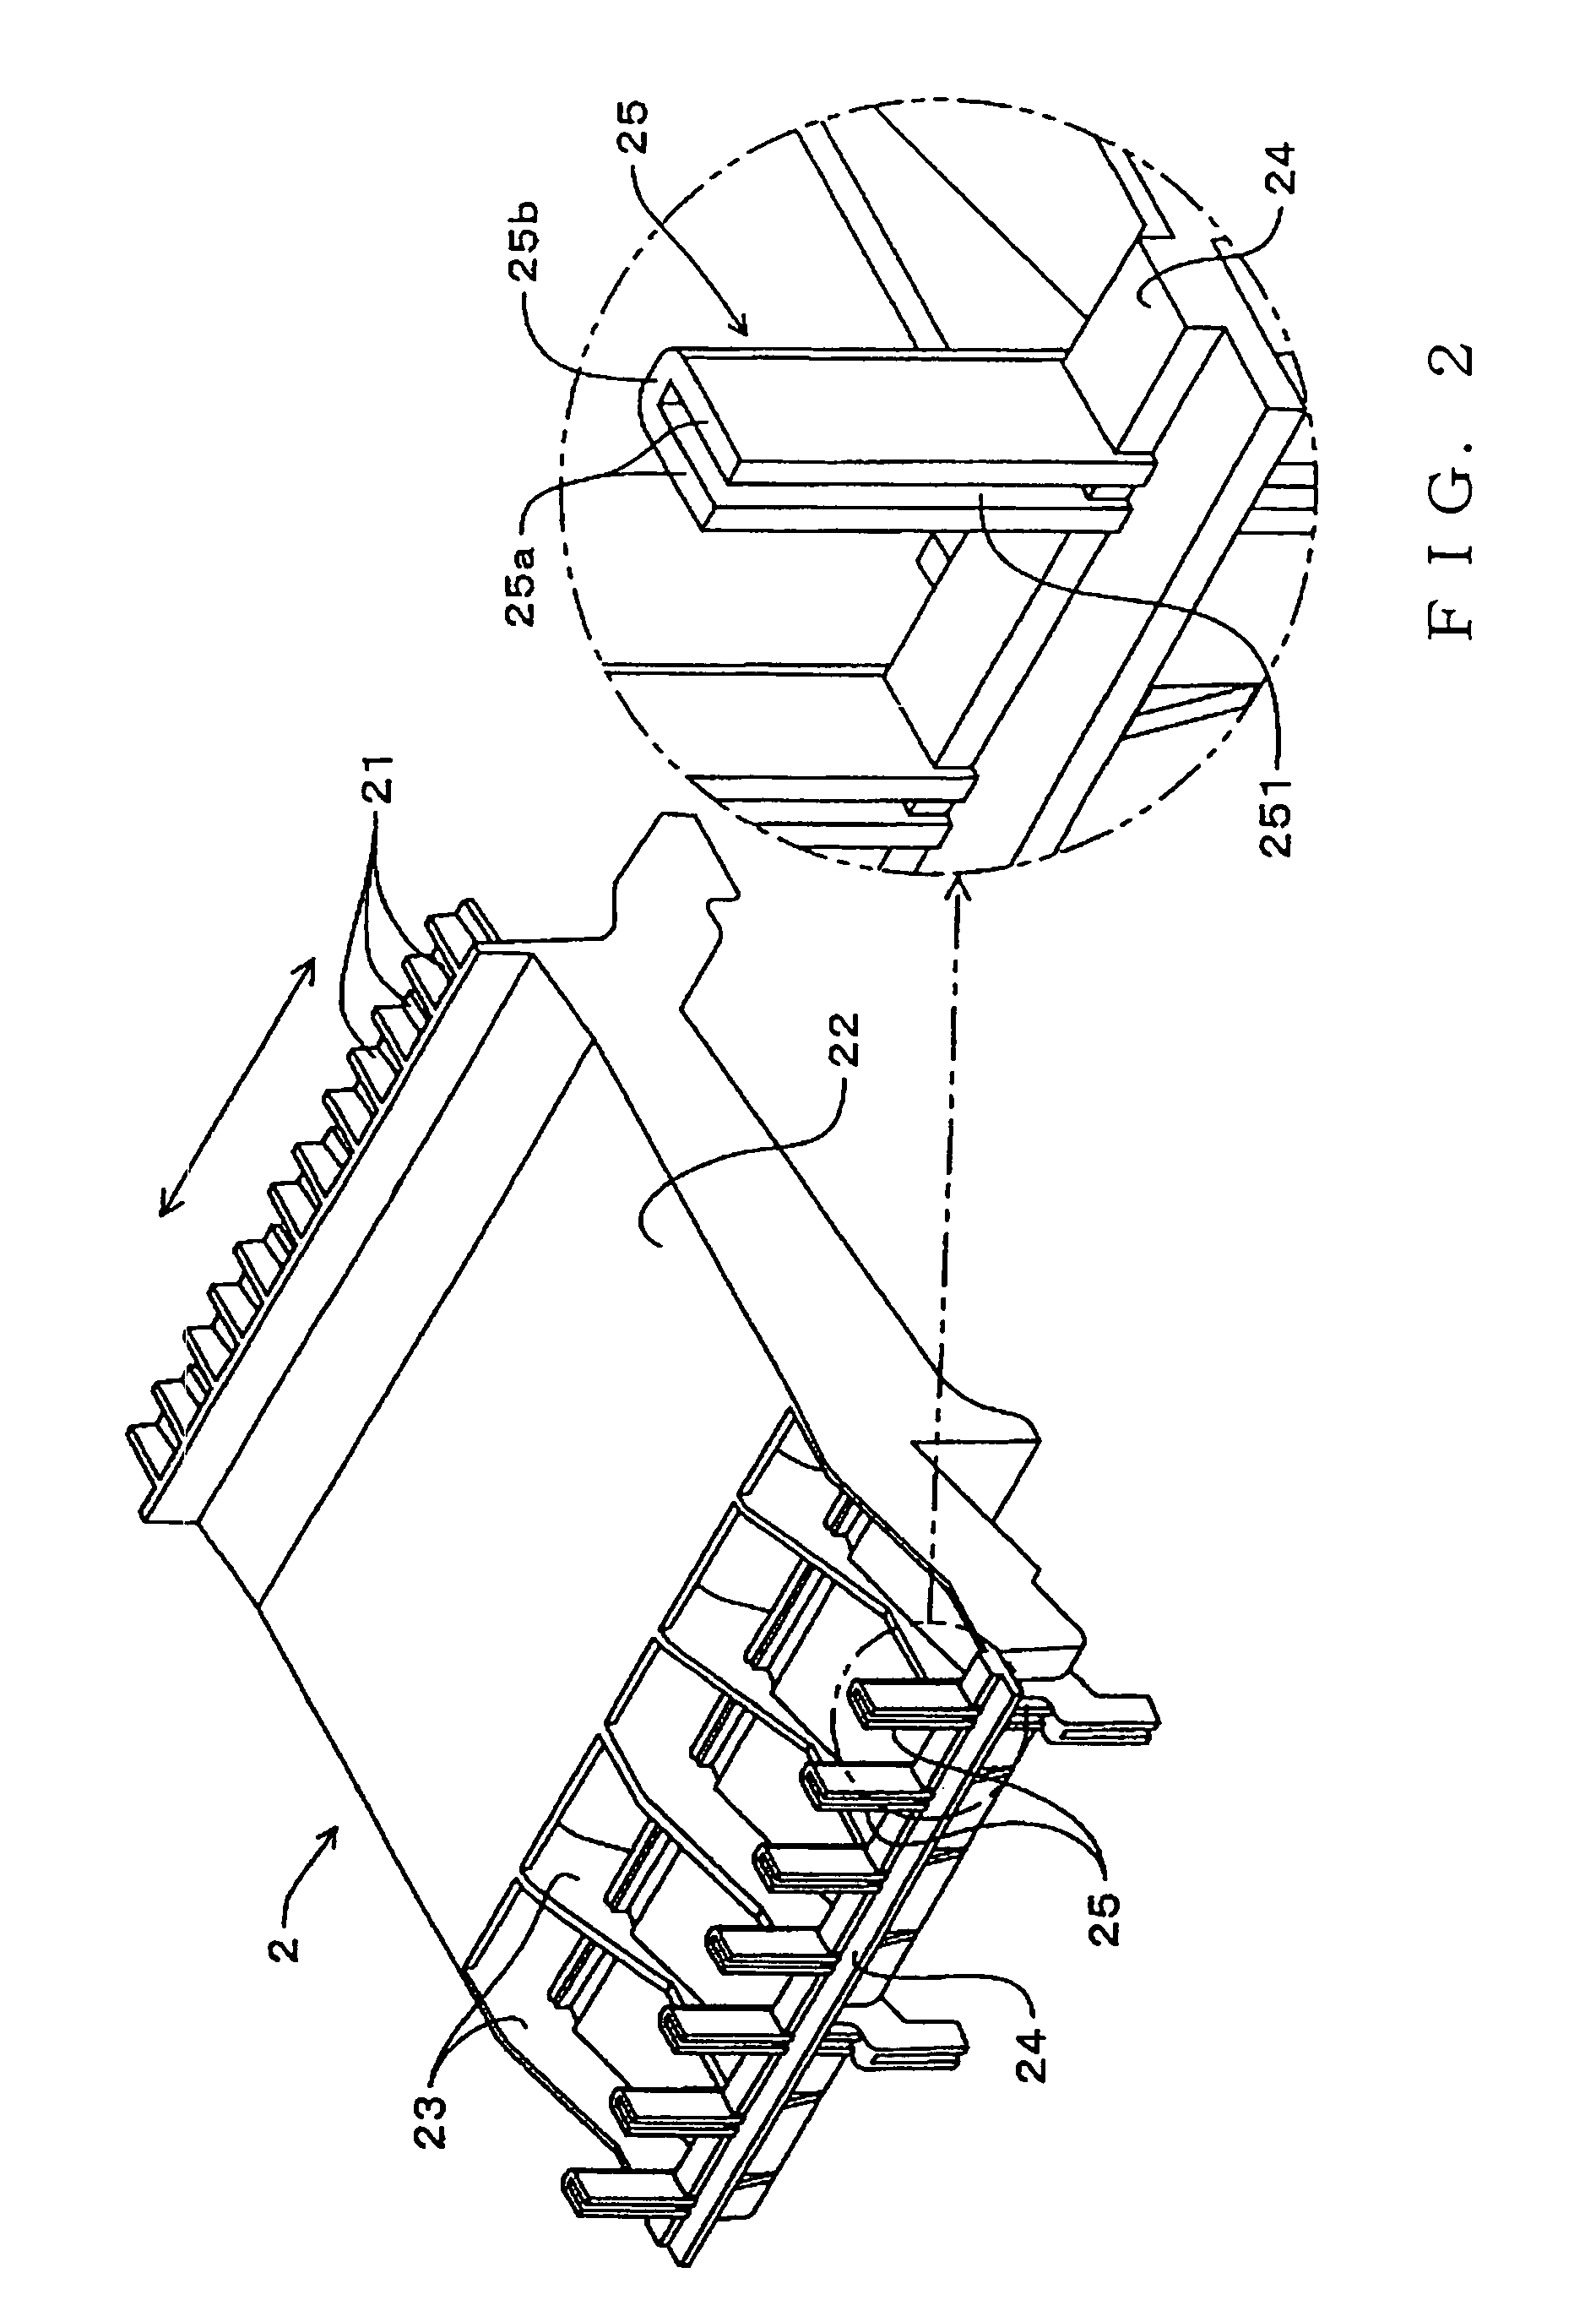 Key guide structure in keyboard apparatus